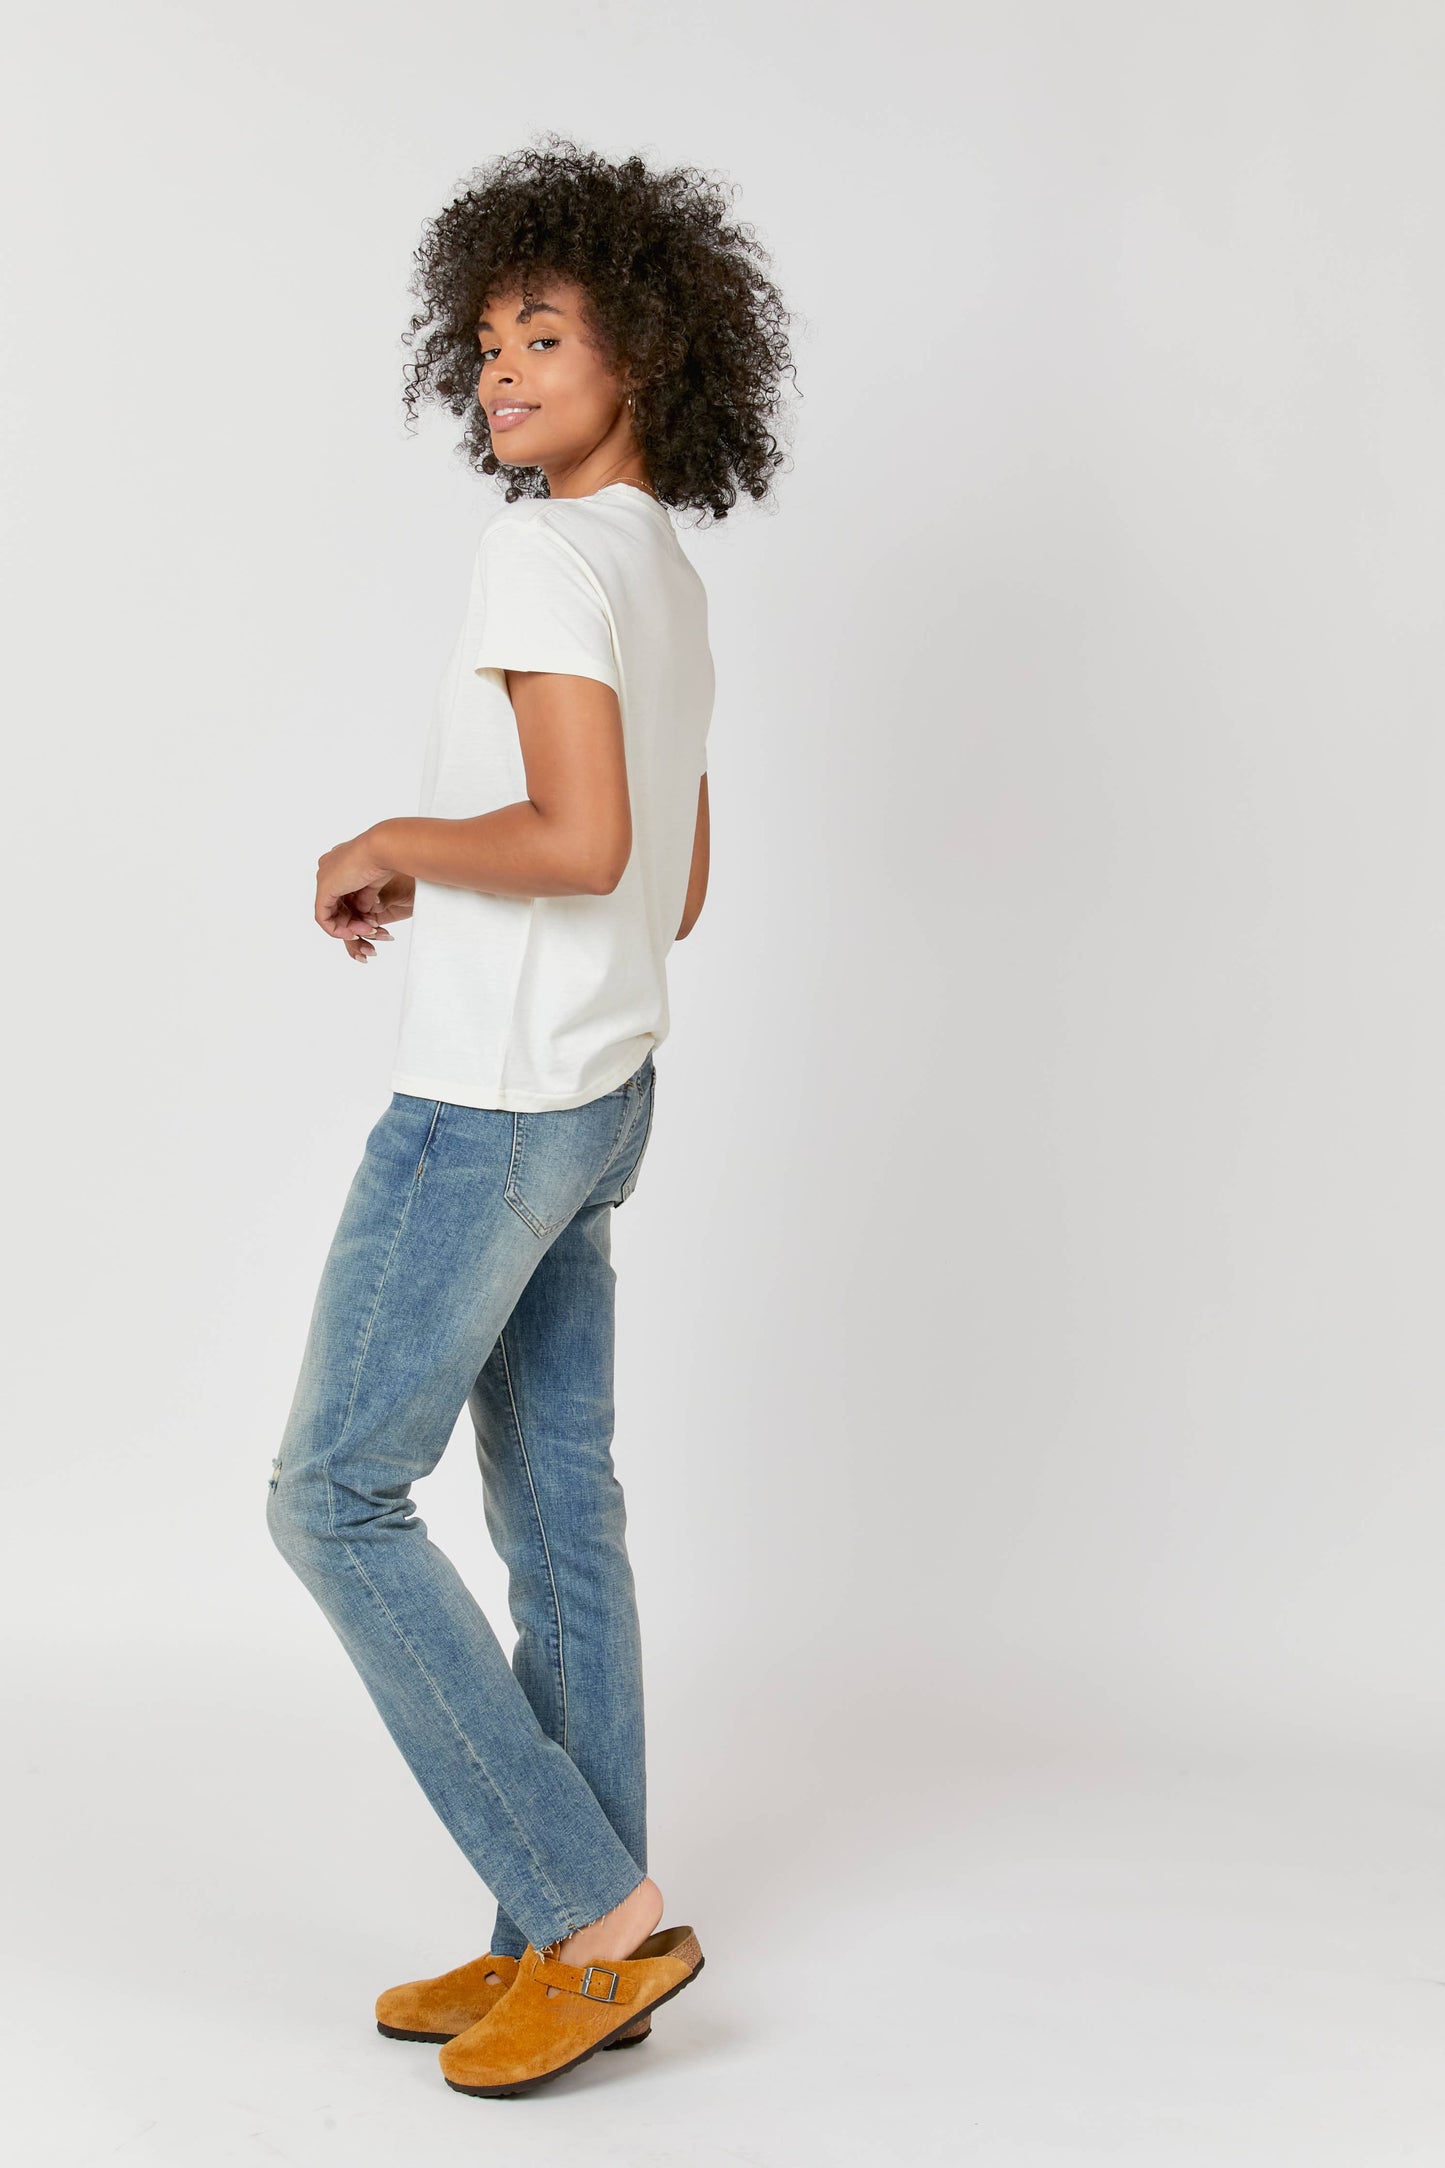 Victoria Susan is a Women's Clothing Boutique in Camden SC  Jeans for Petites.  Women's Clothing Boutique.